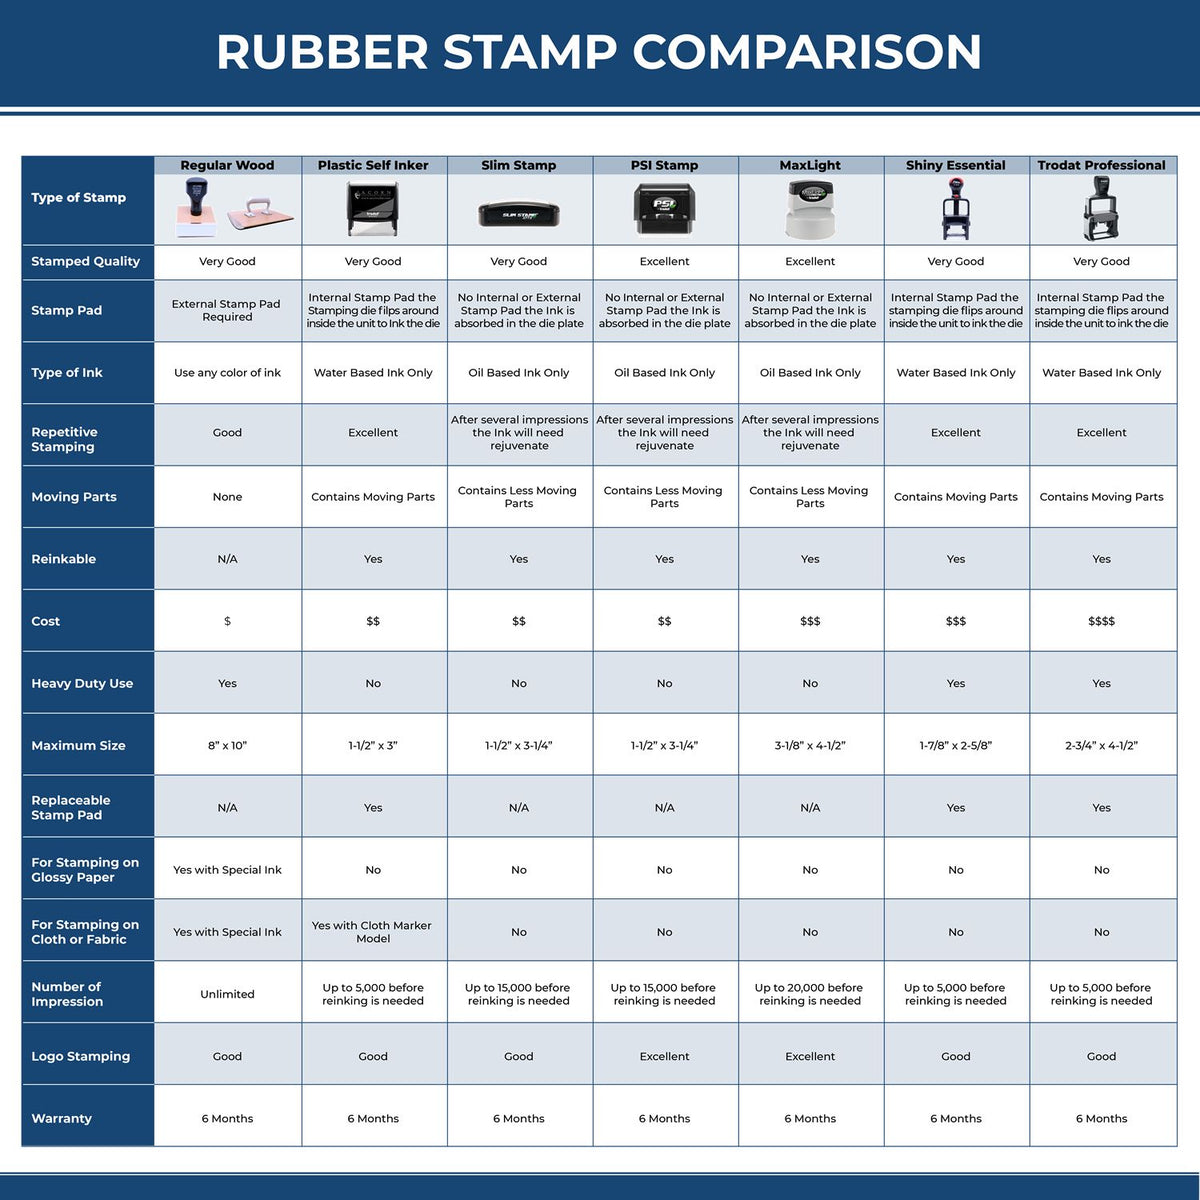 A comparison chart for the different types of mount models available for the Premium MaxLight Pre-Inked Pennsylvania Engineering Stamp.